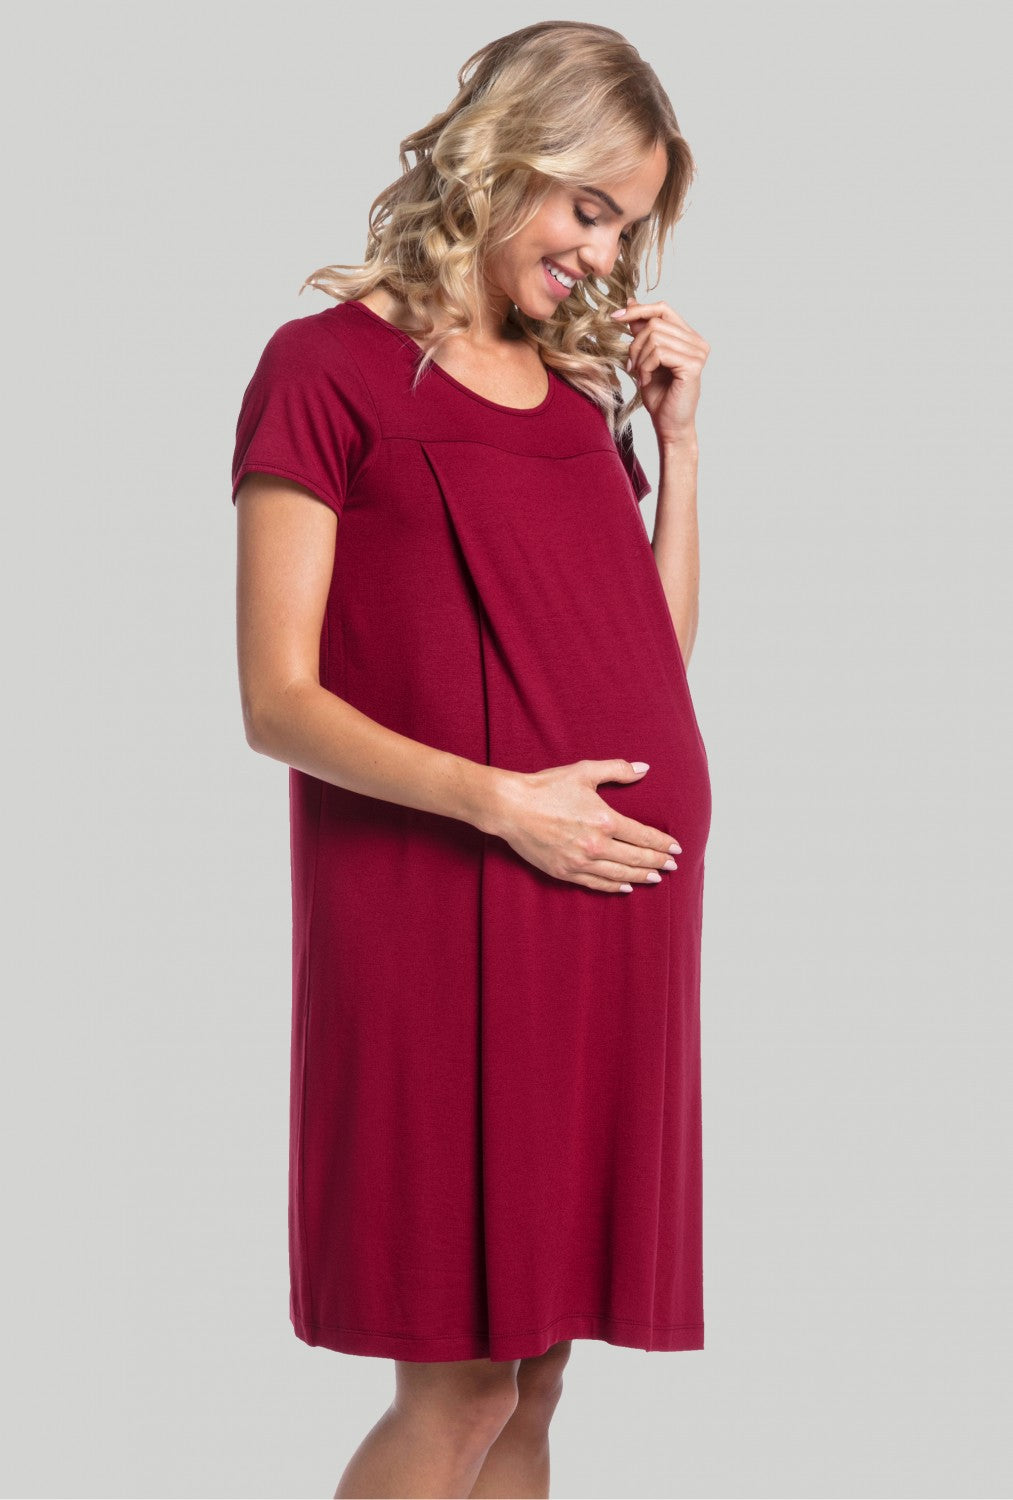 Labor Delivery Hospital Gown